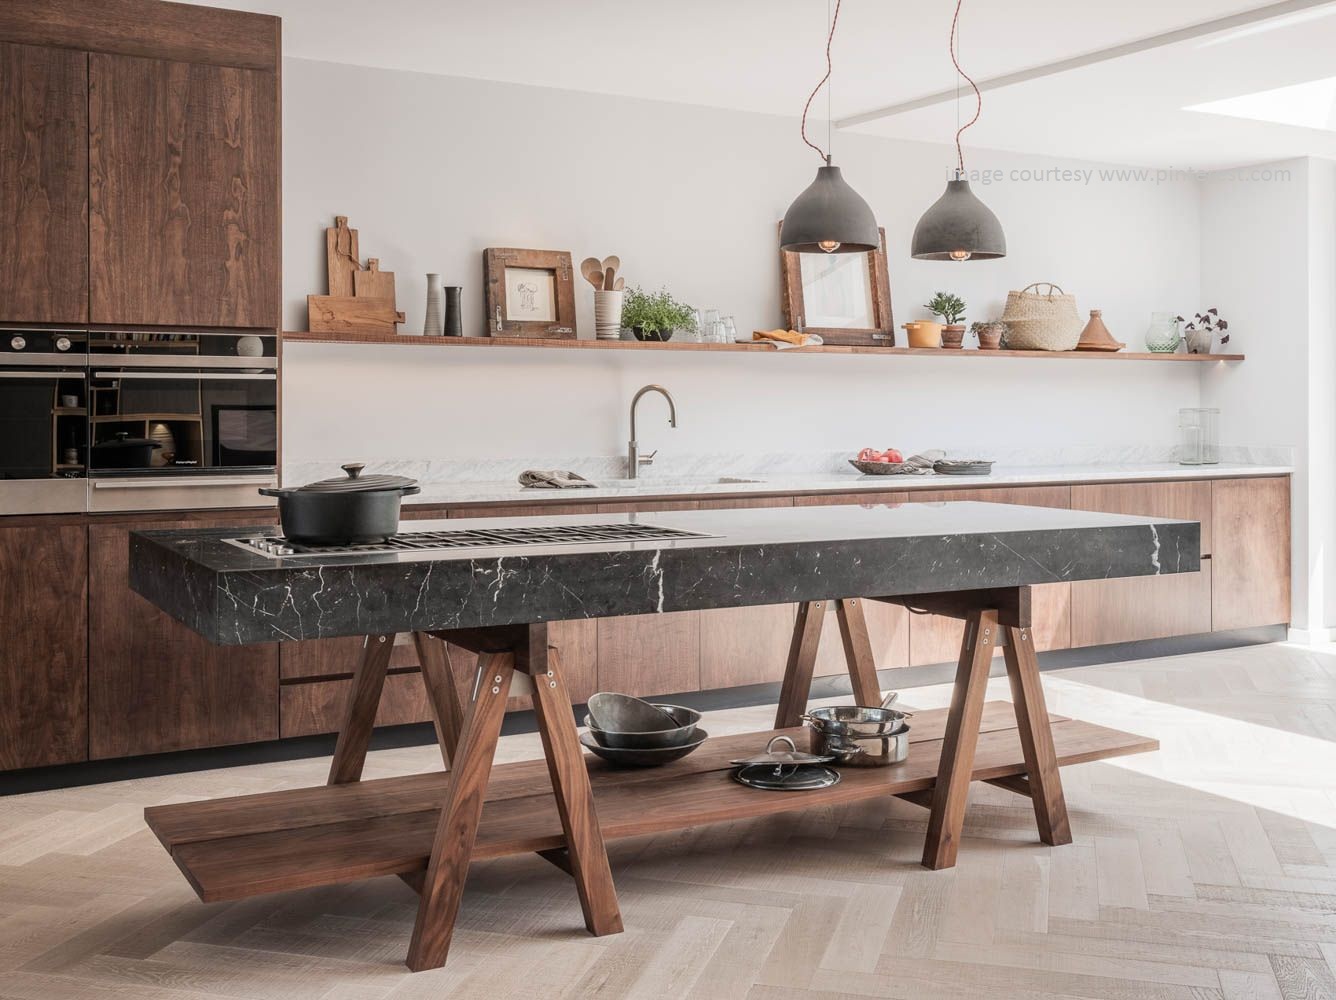 Be on Trend with Latest European Kitchens